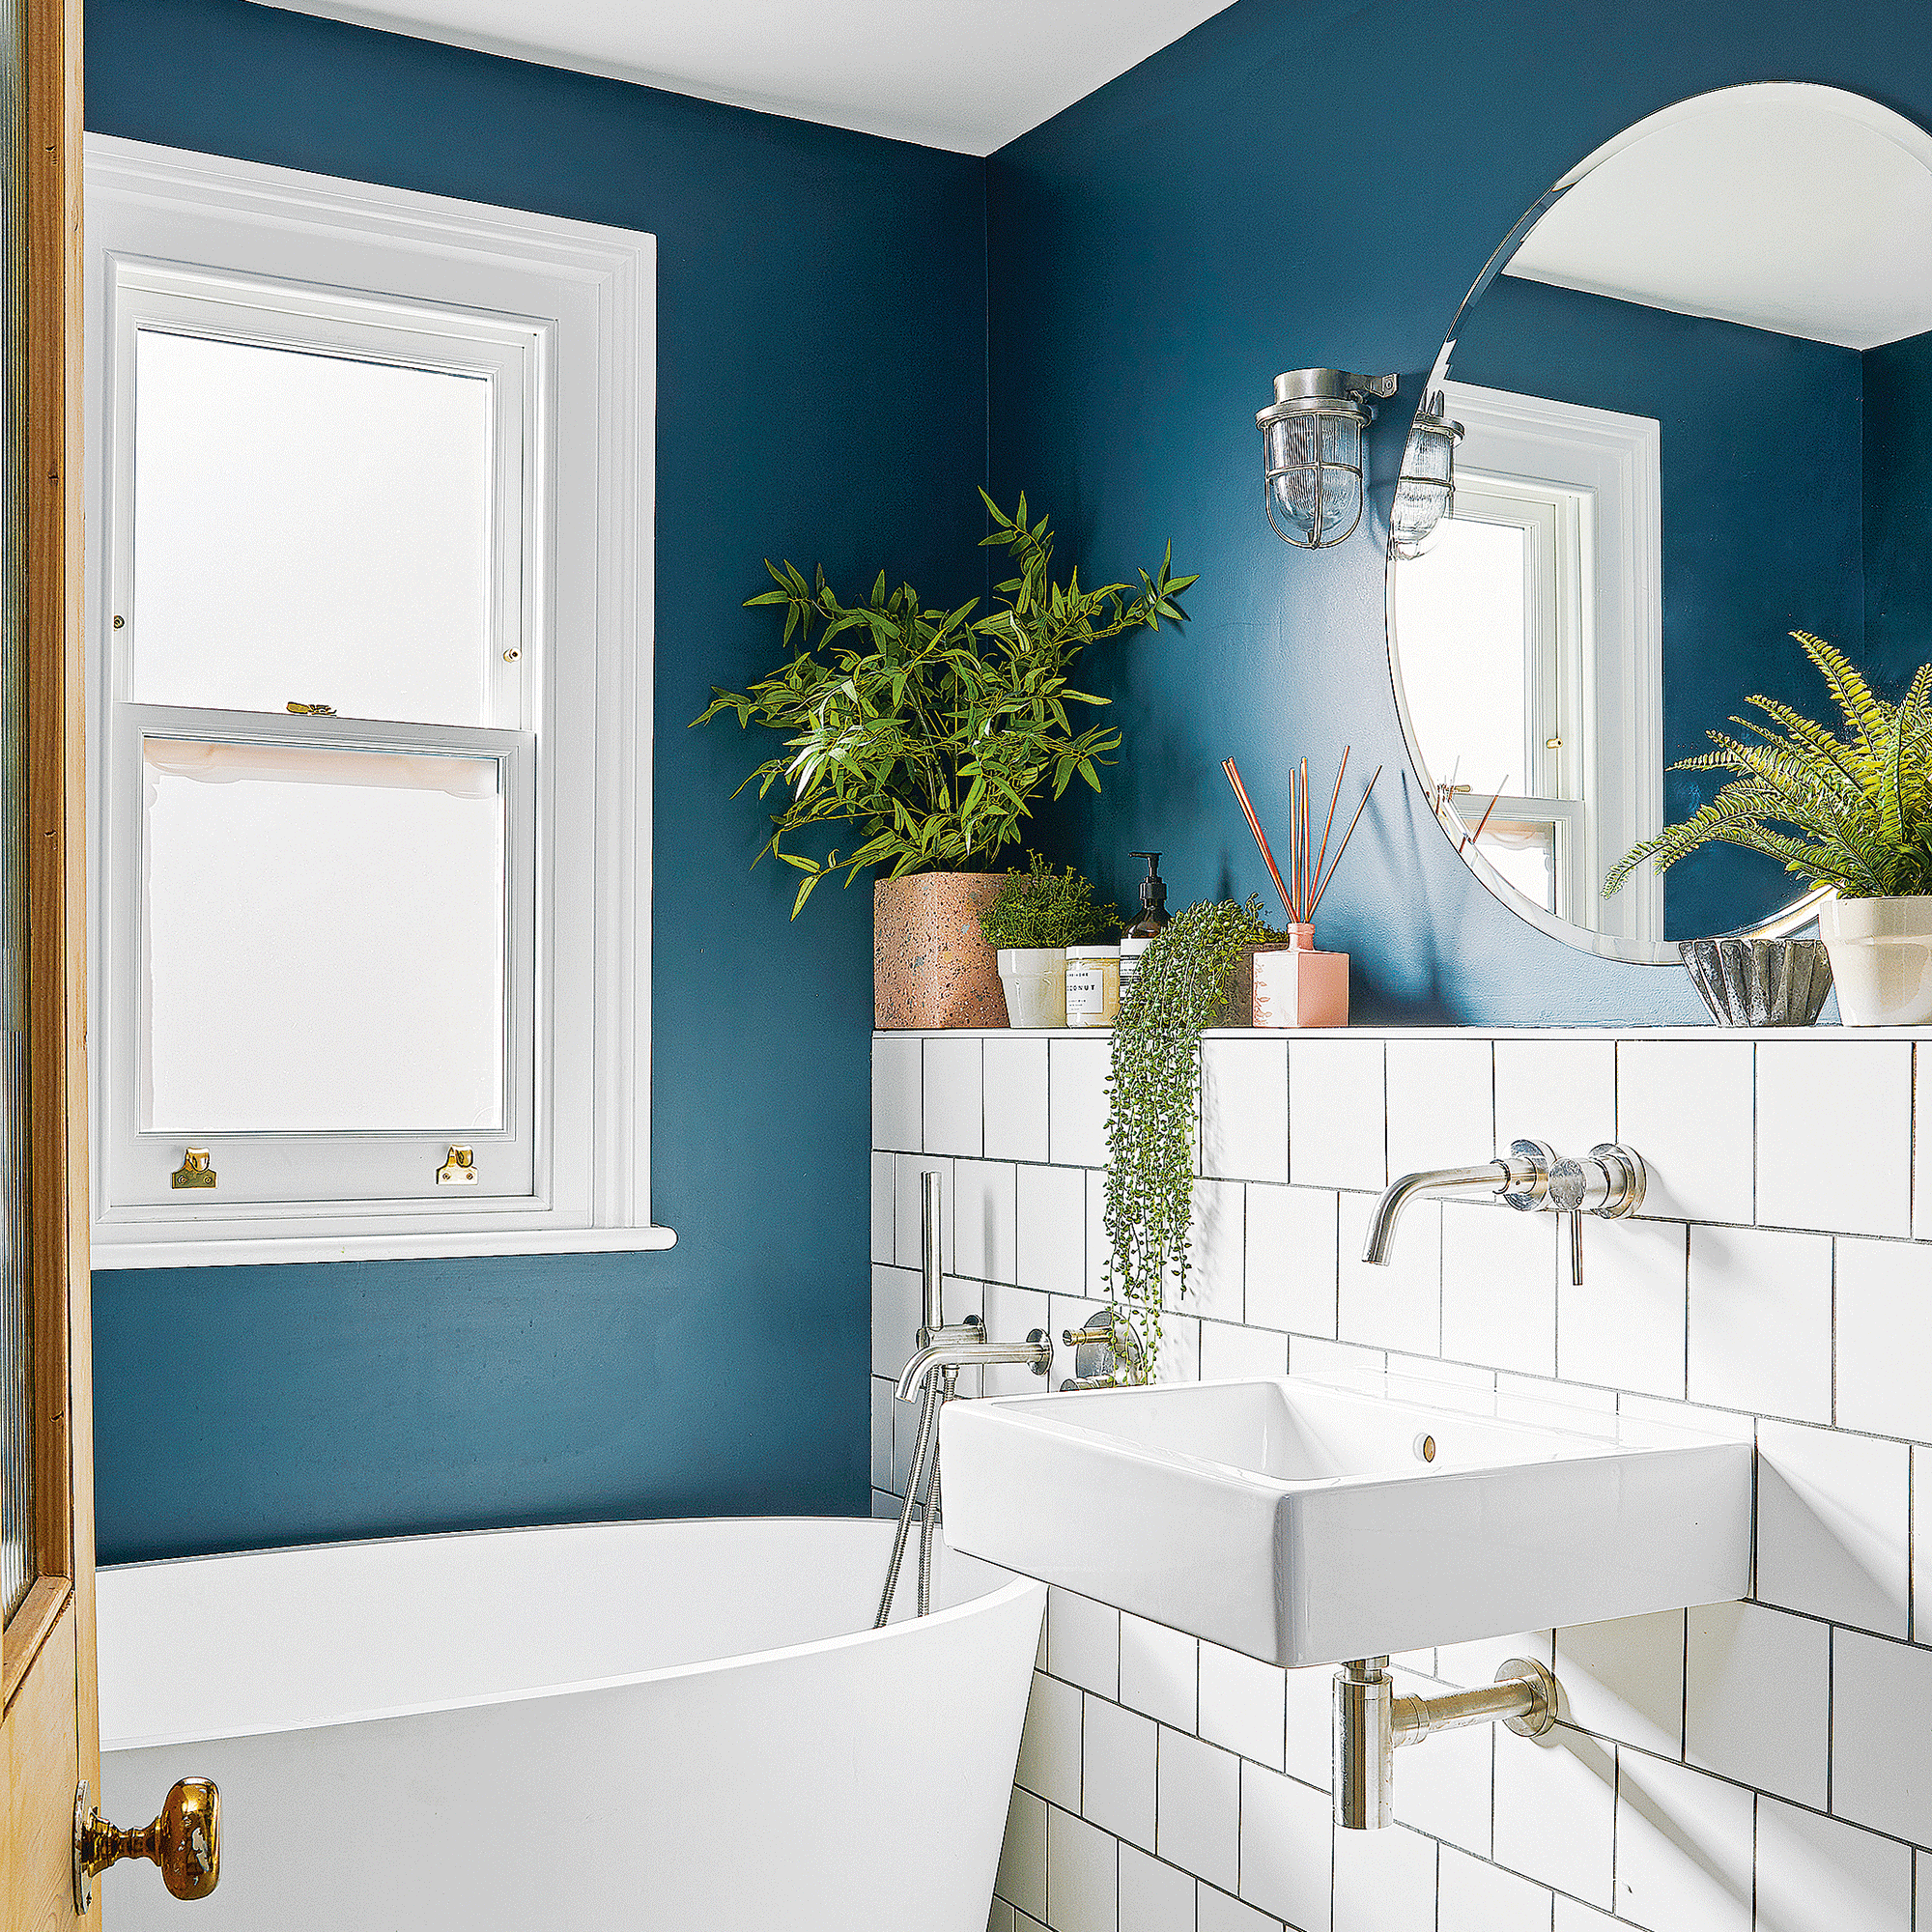 7 design features making it harder to clean your bathroom